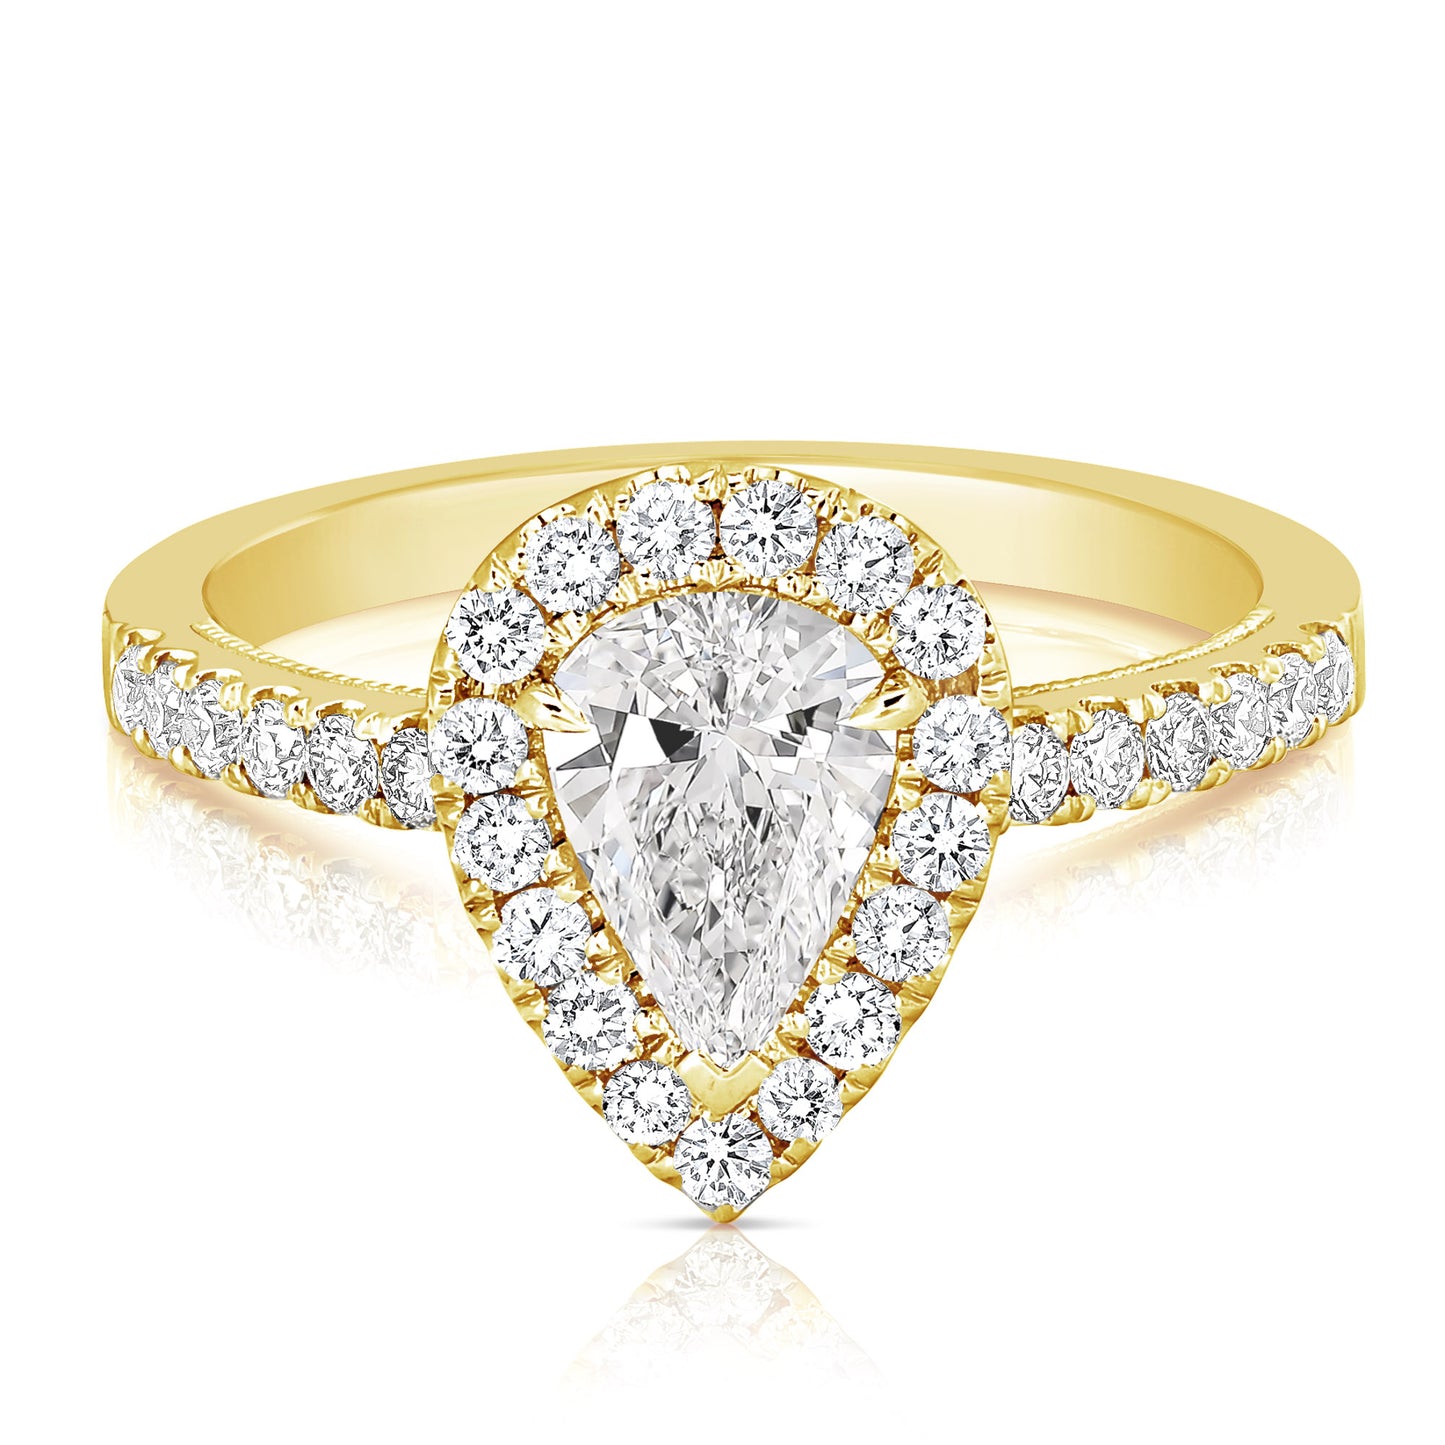 Load image into Gallery viewer, 3/4 CT CENTER PEAR SHAPE HALO DIAMOND ENGAGEMENT RING
